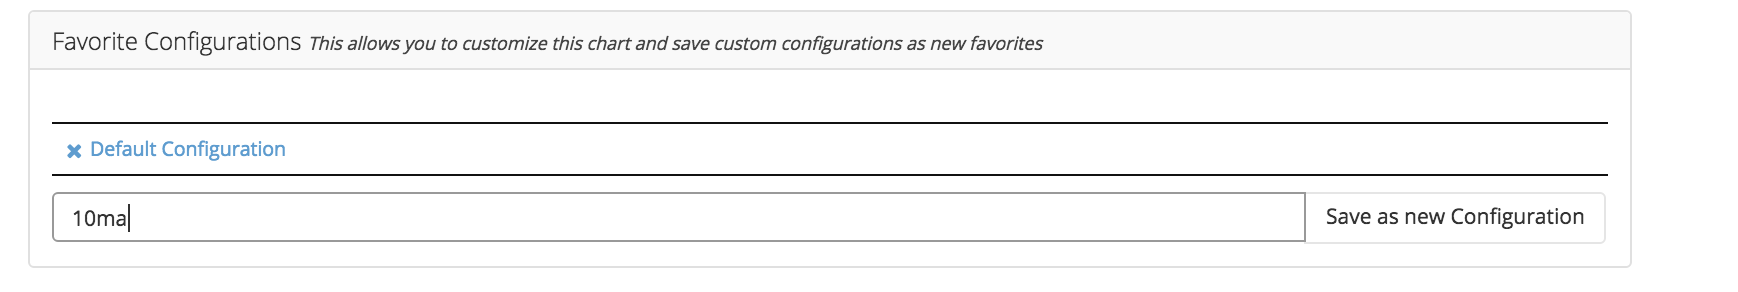 Custom Favorite Configuration name and save